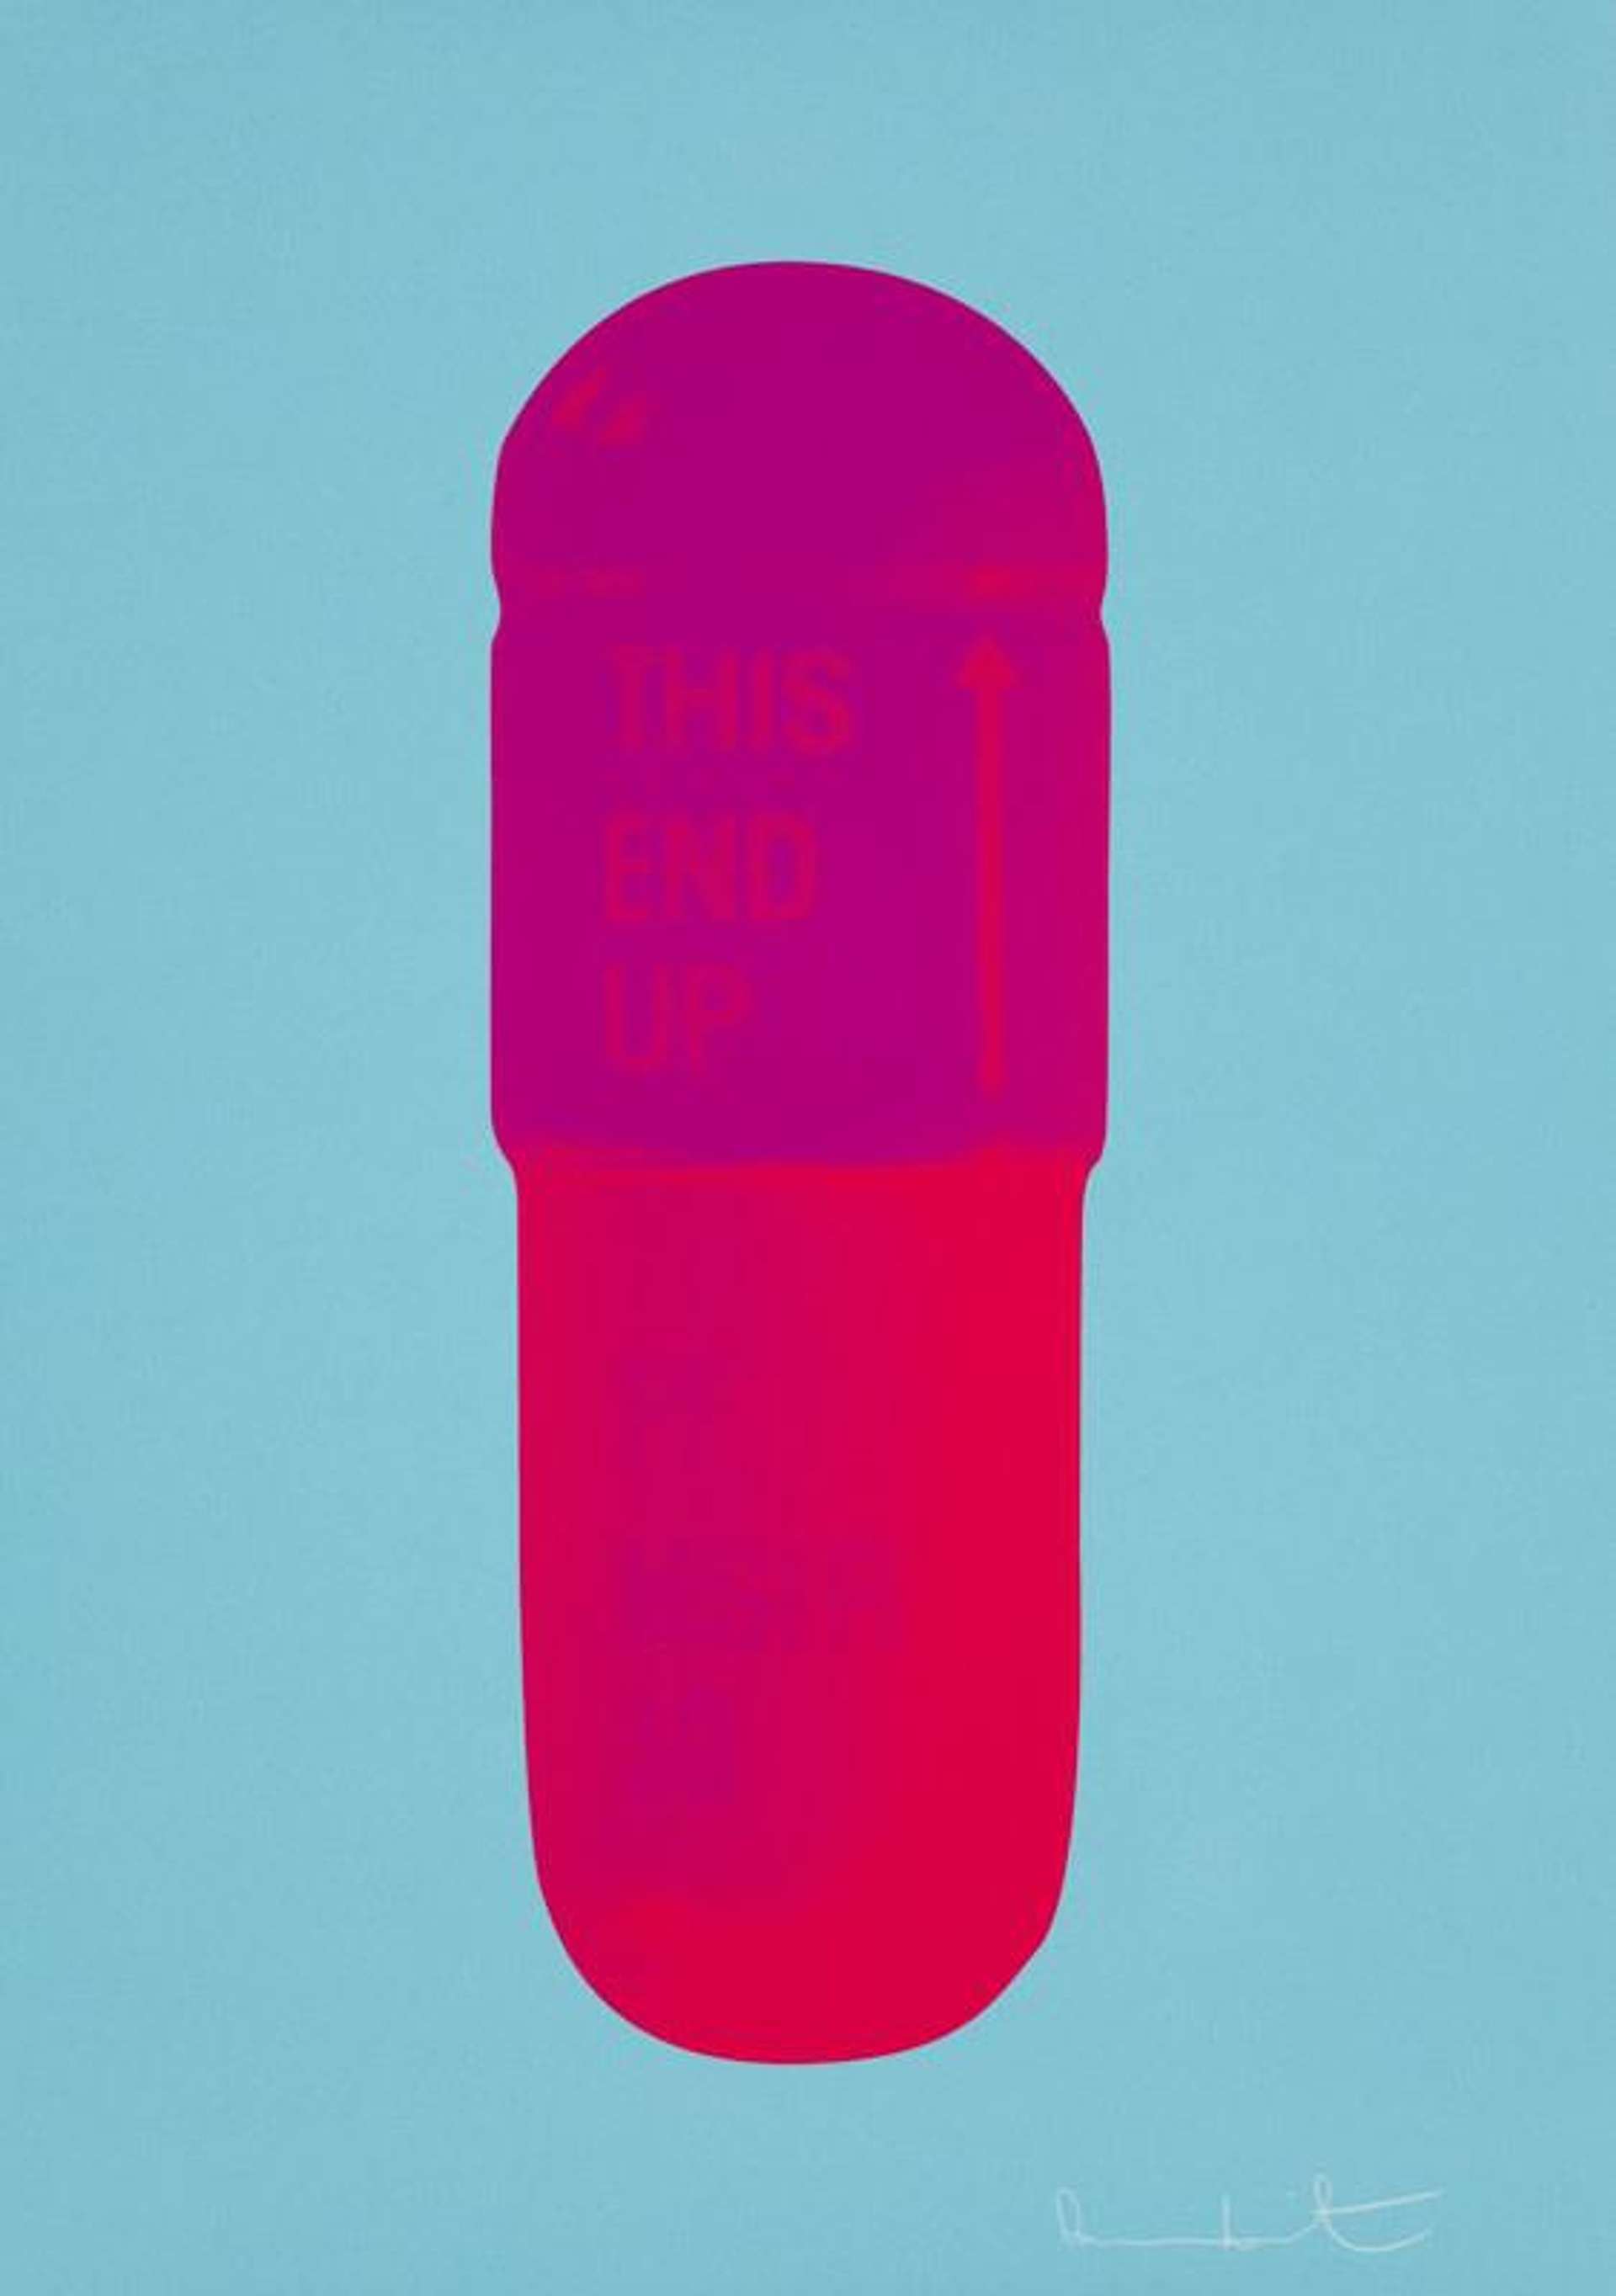 The Cure (deep sky blue, electric purple, lipstick red) - Signed Print by Damien Hirst 2014 - MyArtBroker